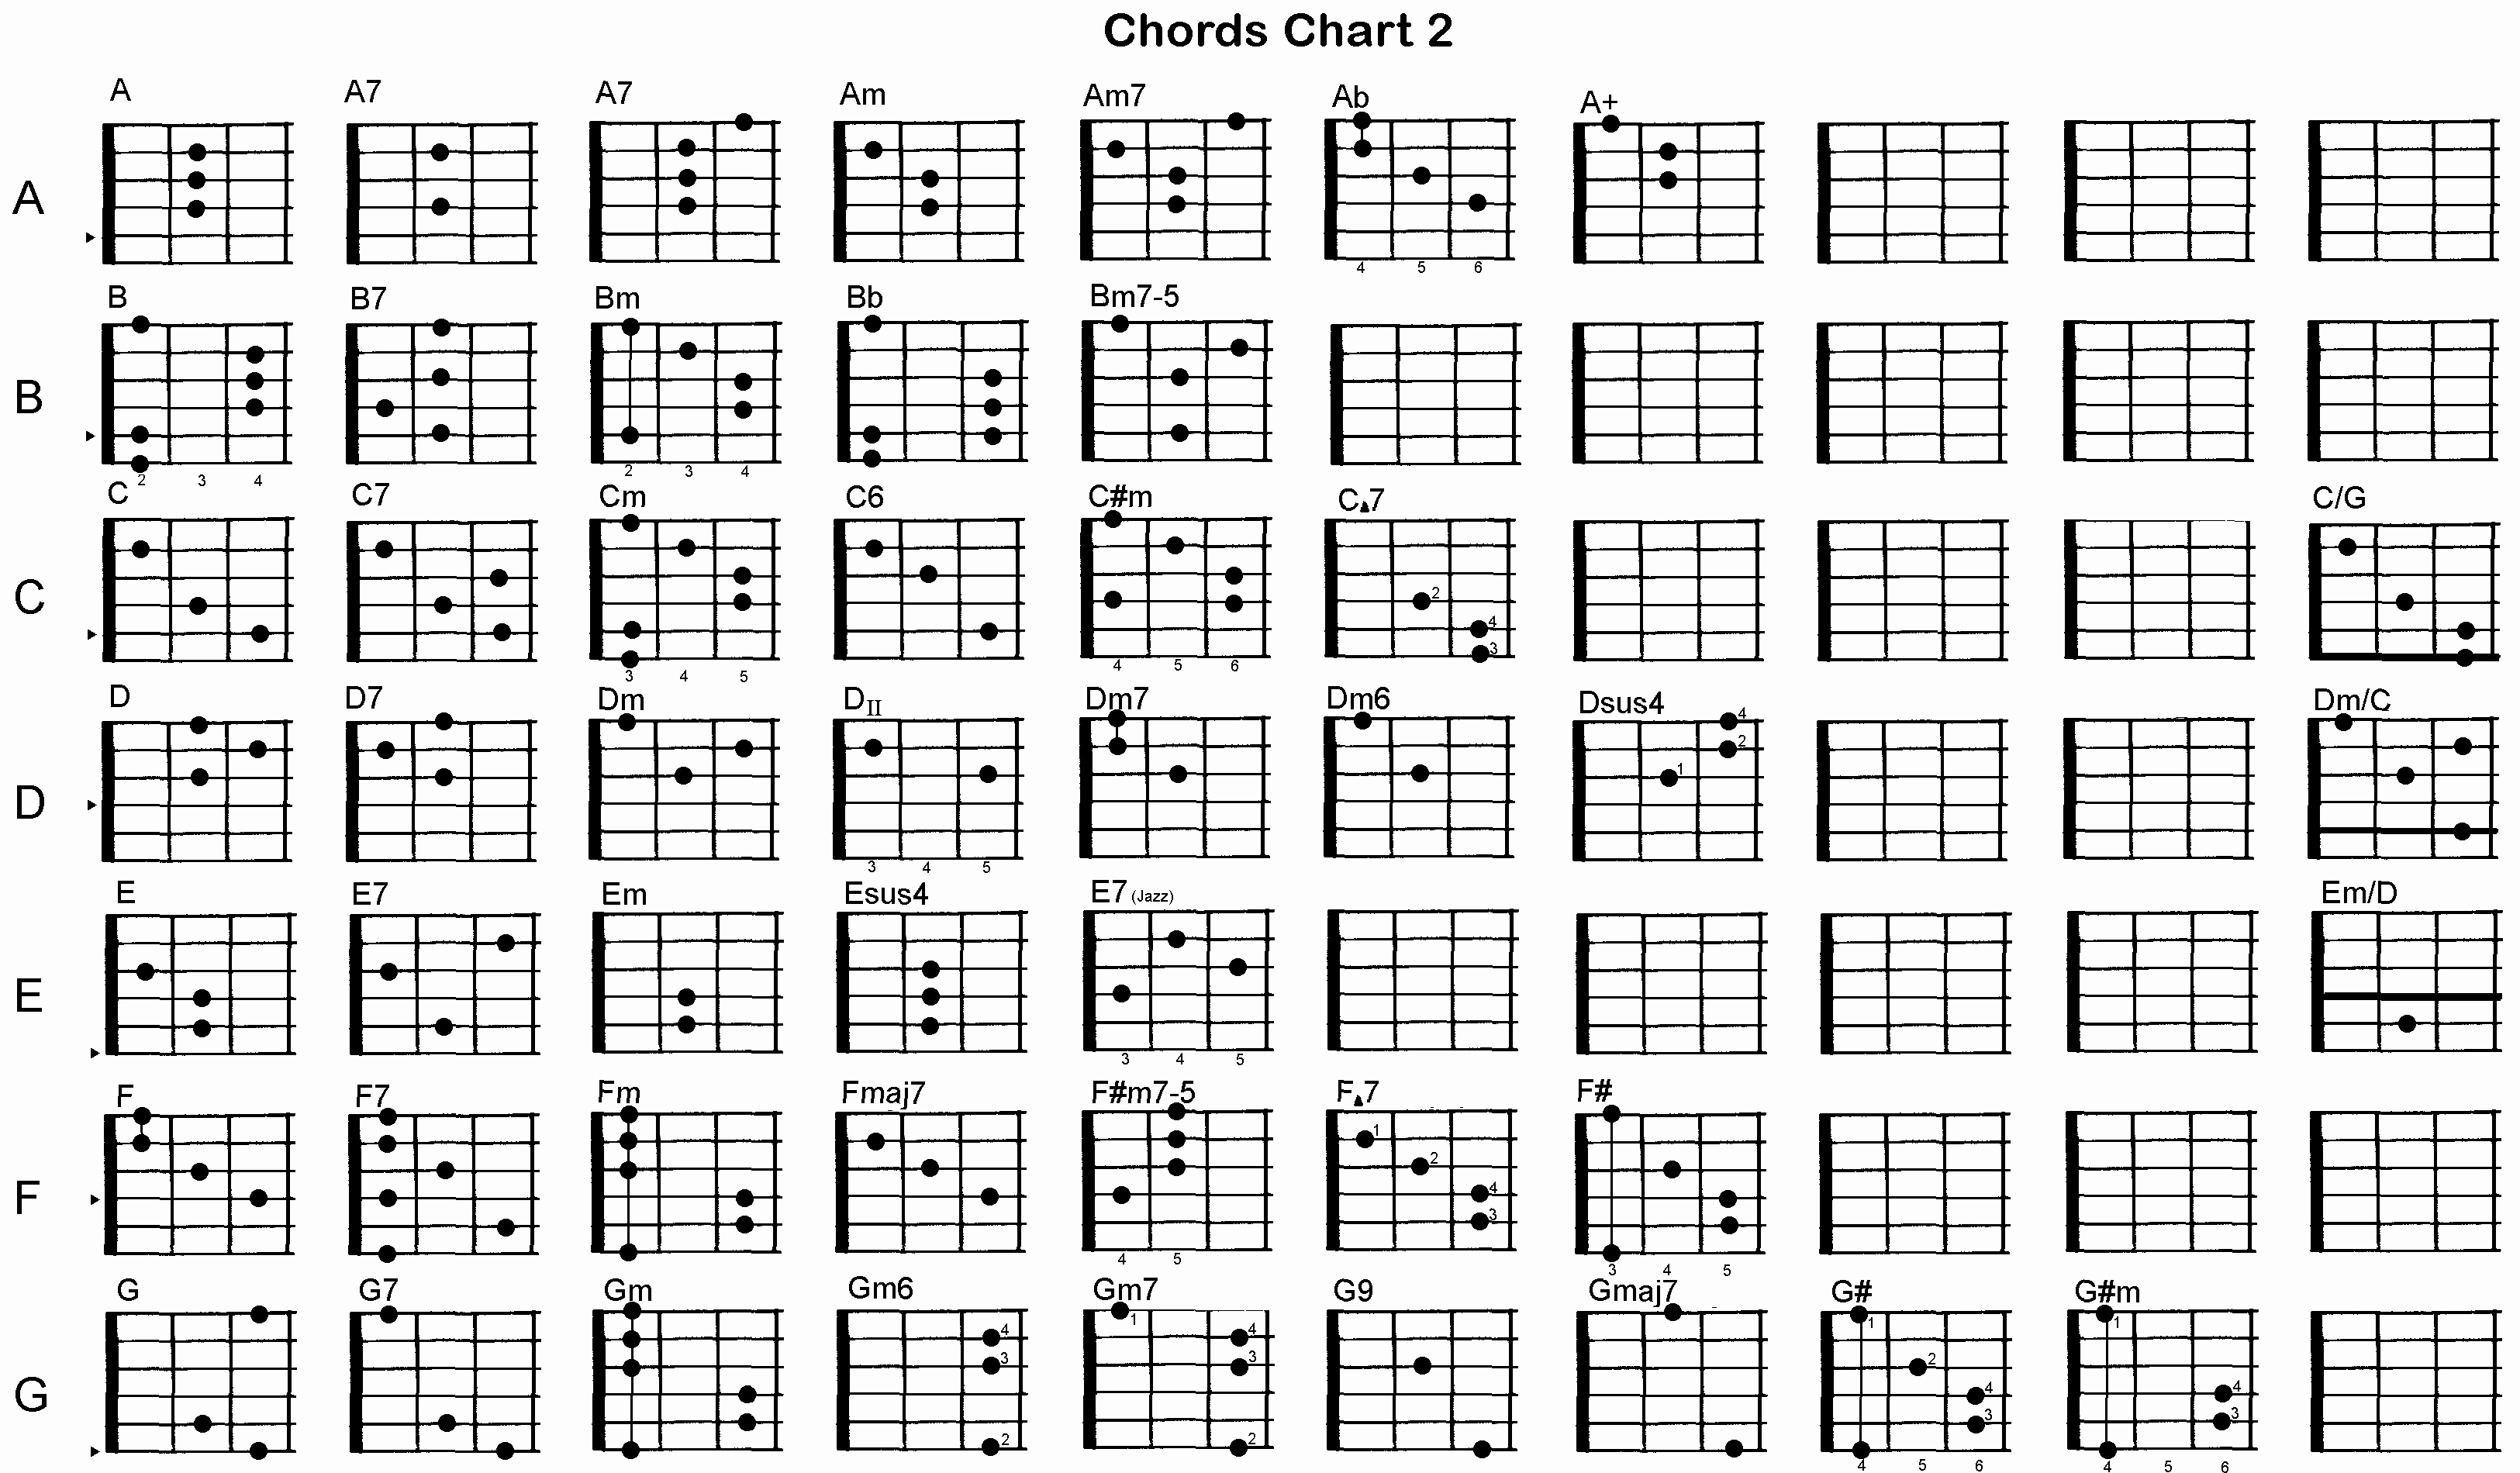 Dm7 Guitar Chord Precise Lefty Guitar Chord Chart Notes Of The Lefty Guitar Fretboard